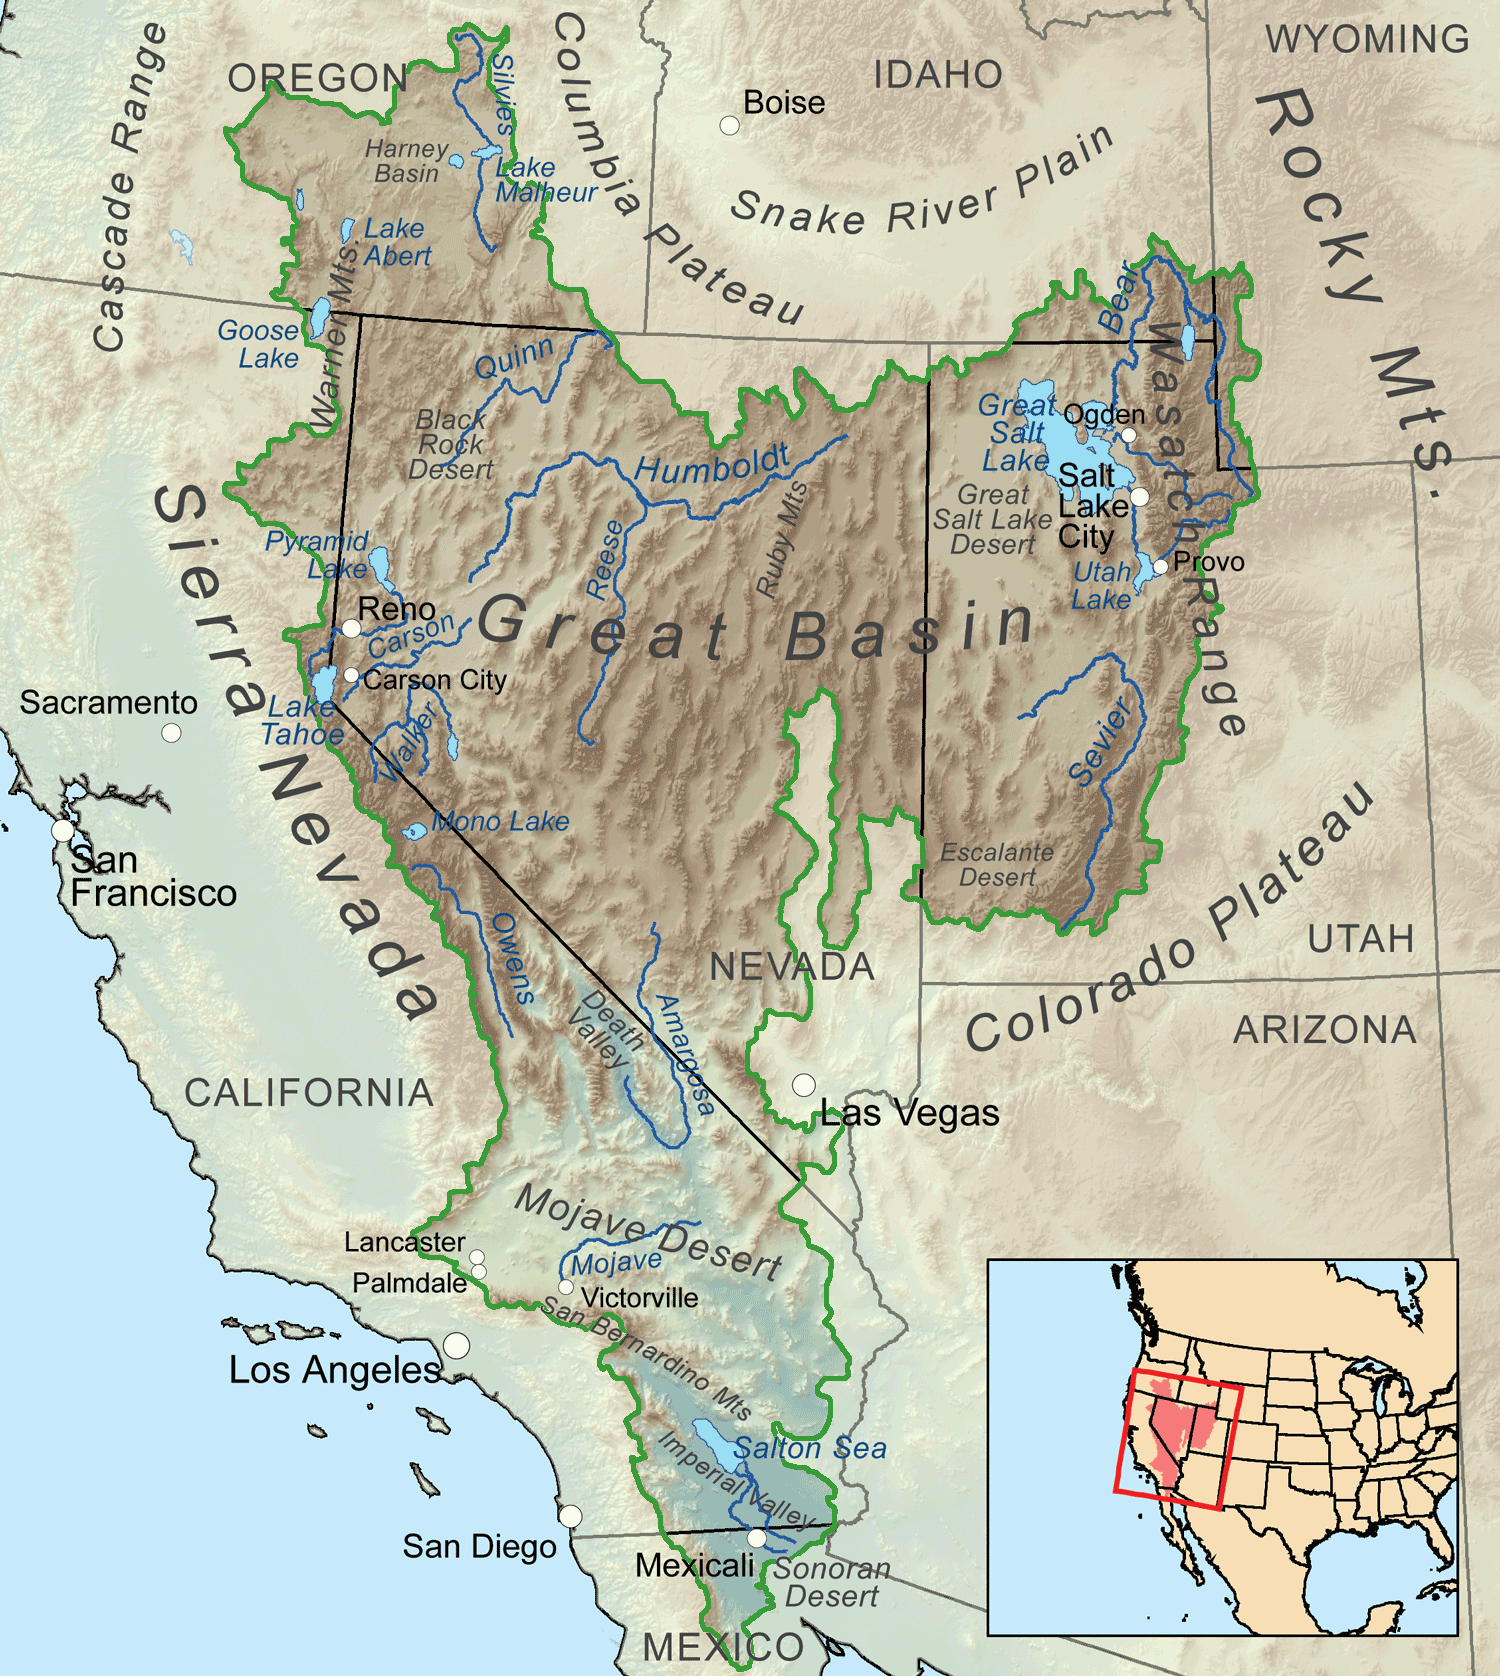 Map showing the extent of the Great Basin of the western and southwestern United States.